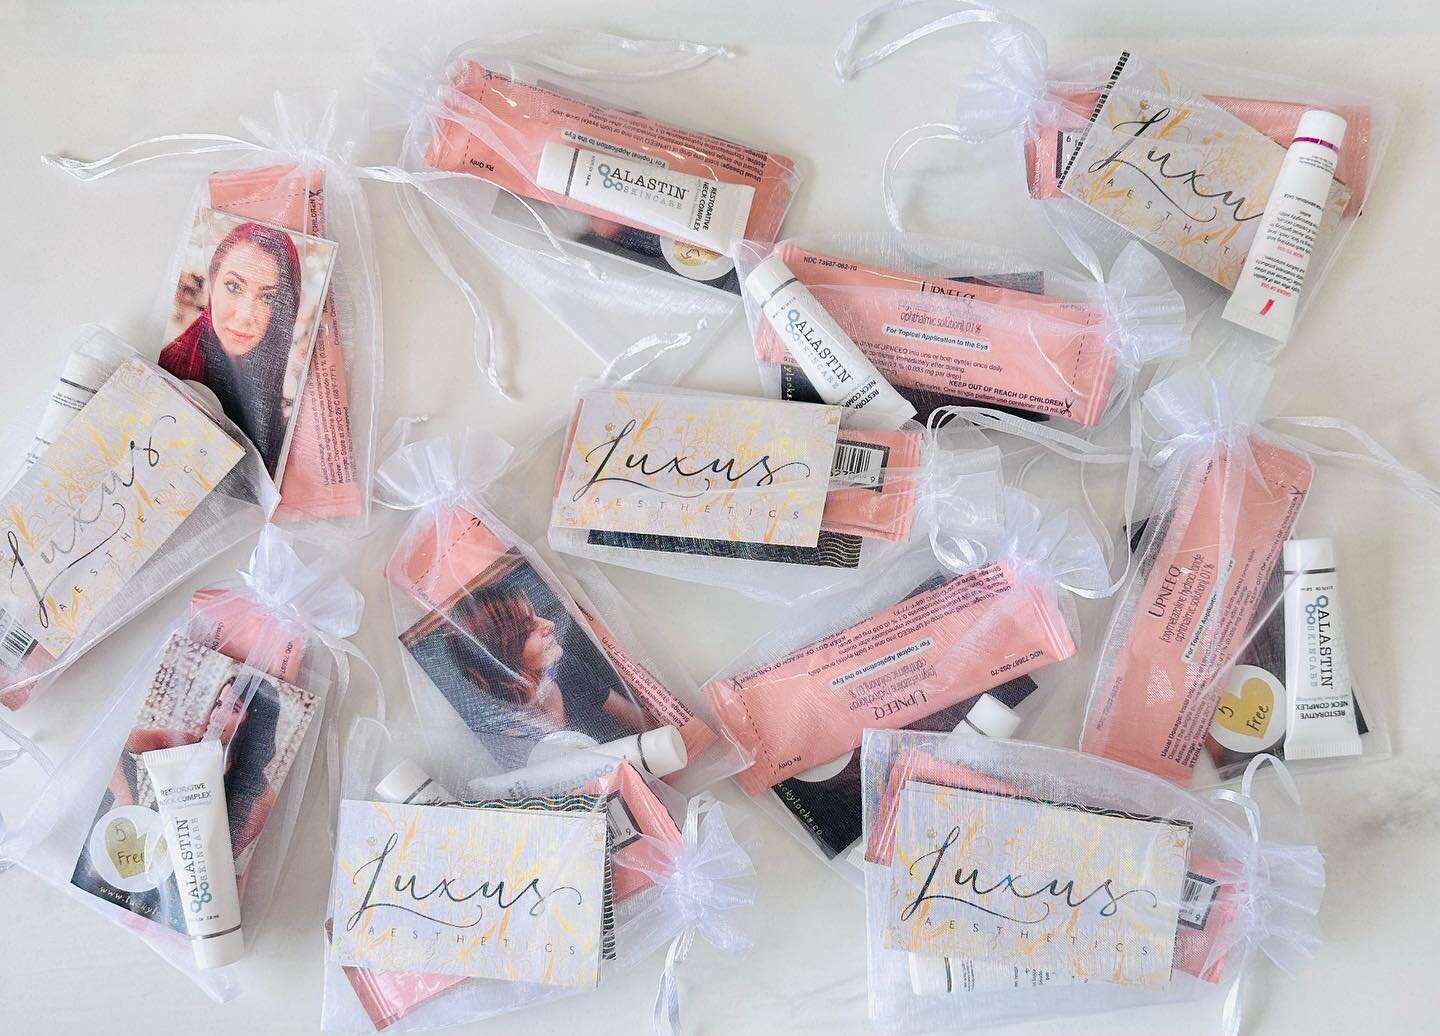 May goodie bags are ready to be picked up🎀

We love treating our Botox/Dysport Members with little goodies in between treatments! If you are a member already, stop by Luxus Aesthetics to get your gift bag! 

If you are interested in our membership o